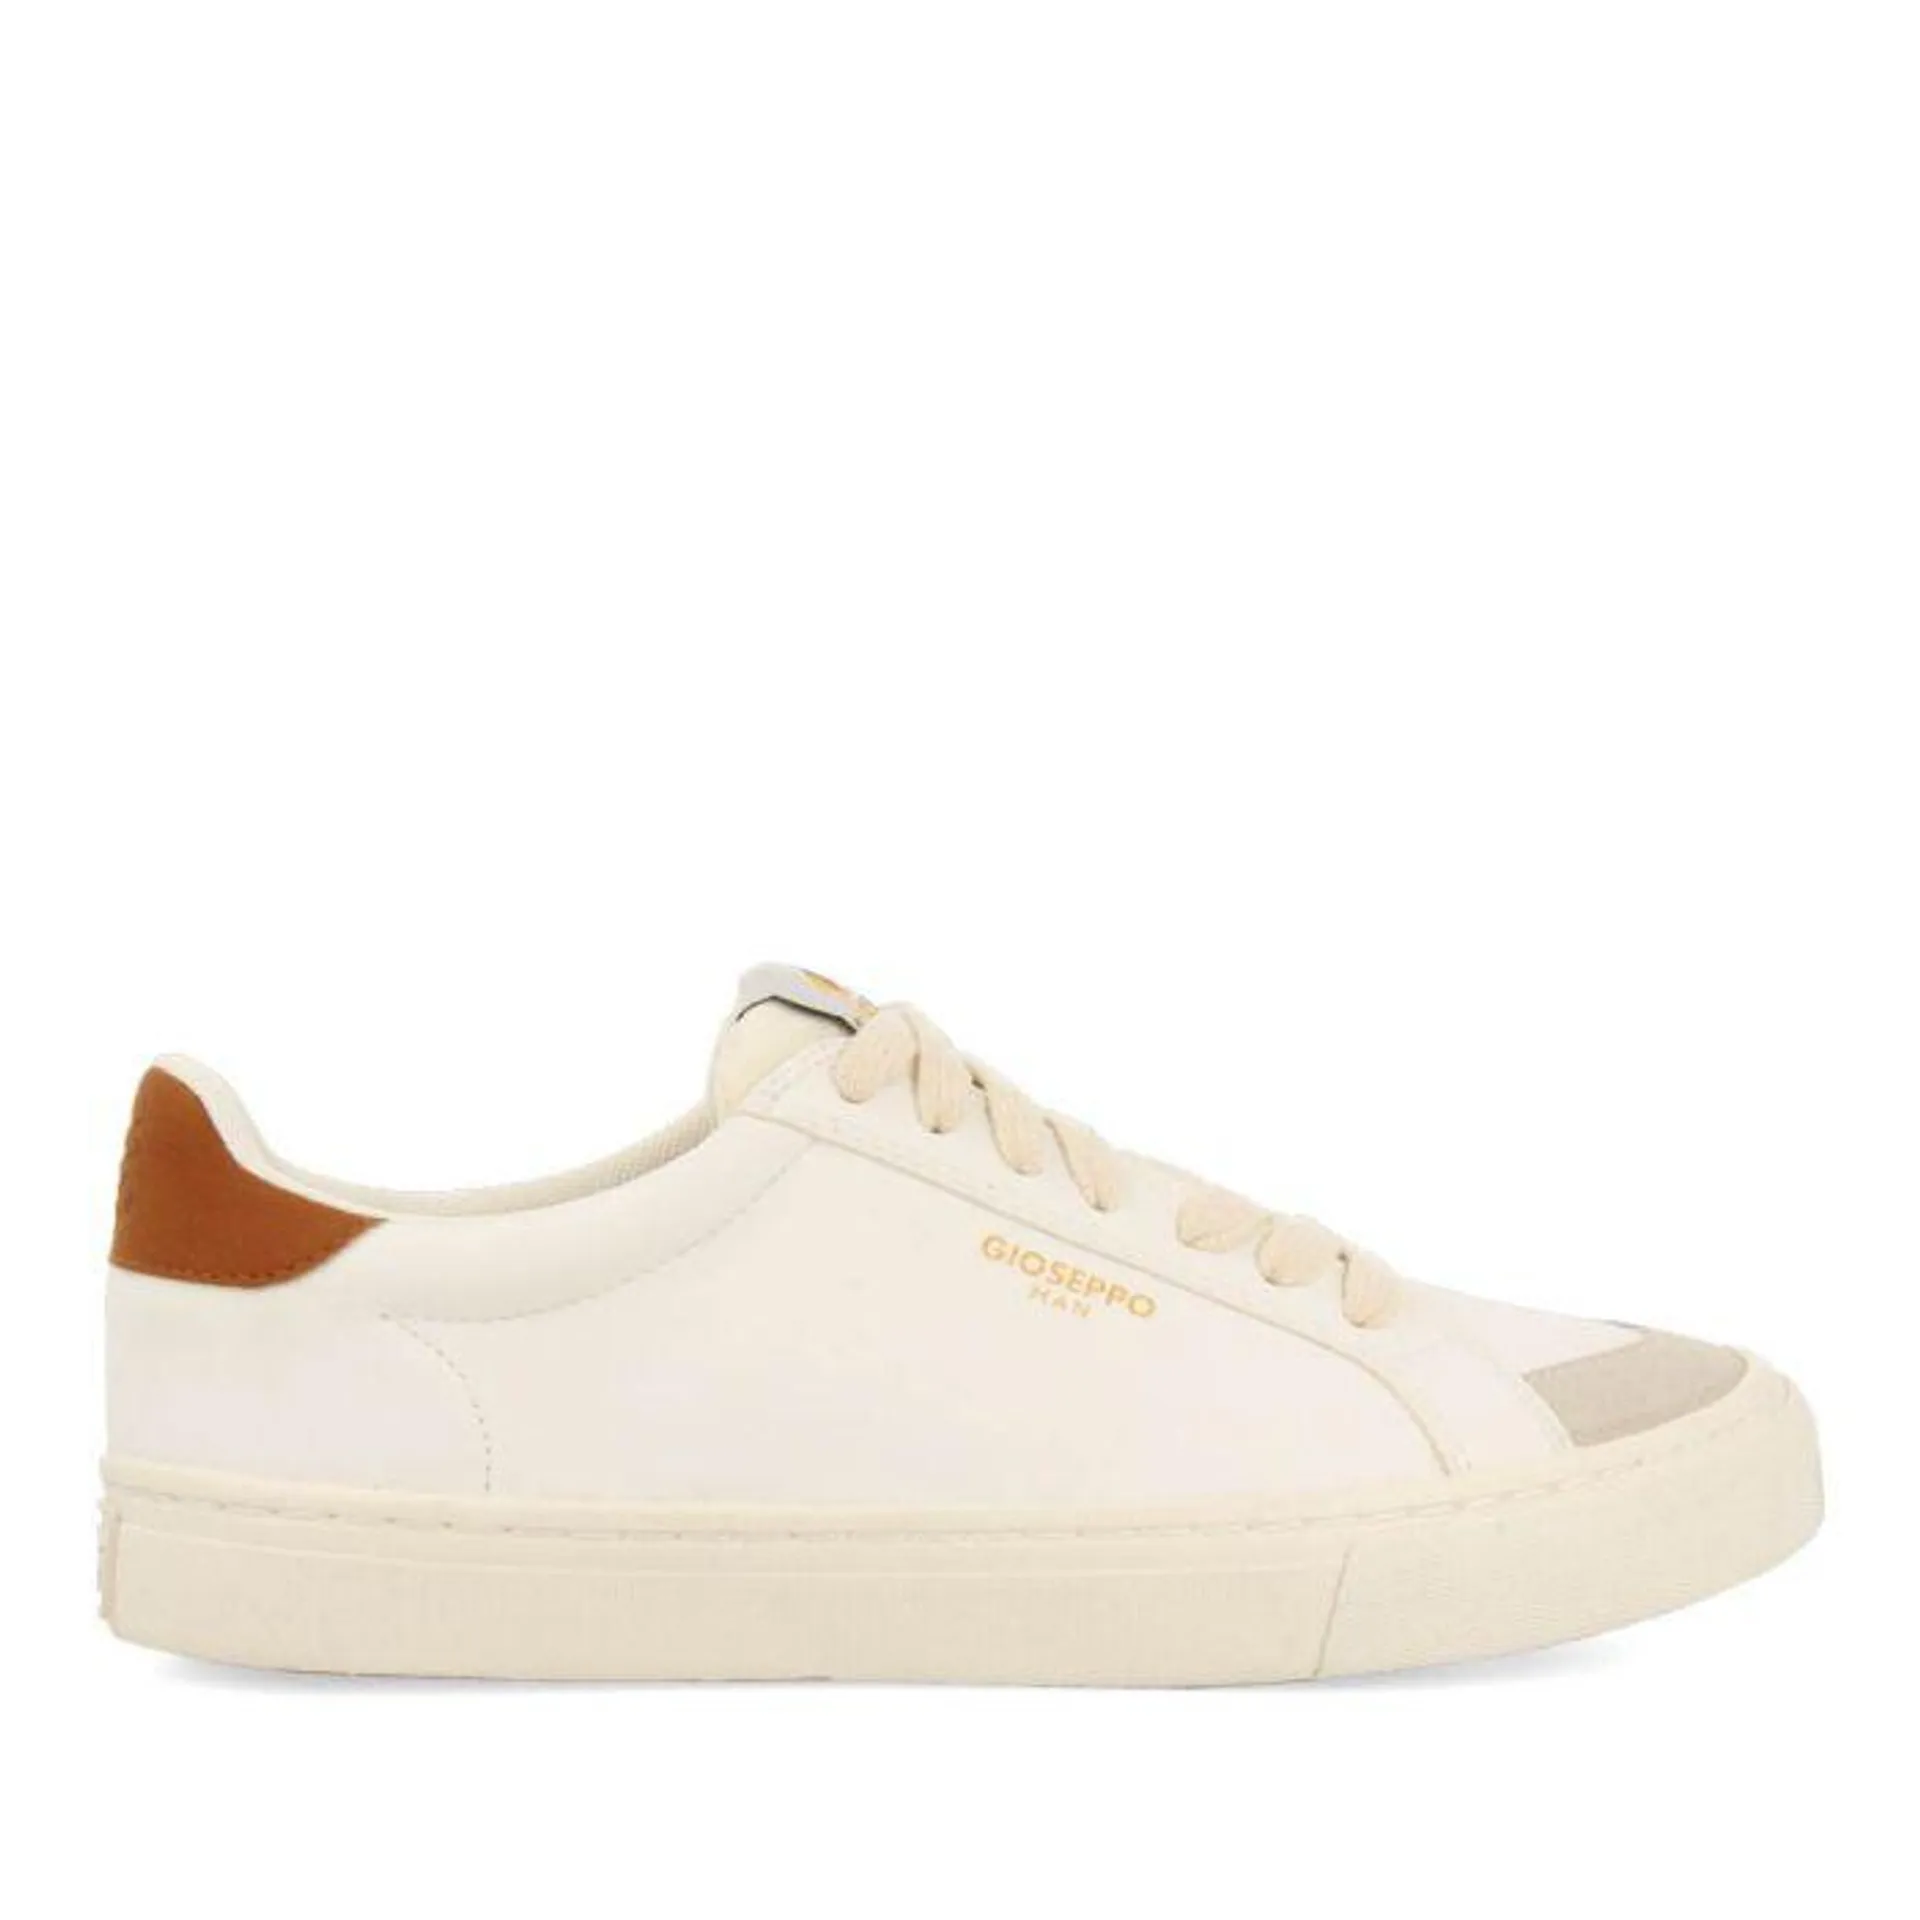 Roujan men's white sneakers with tan details